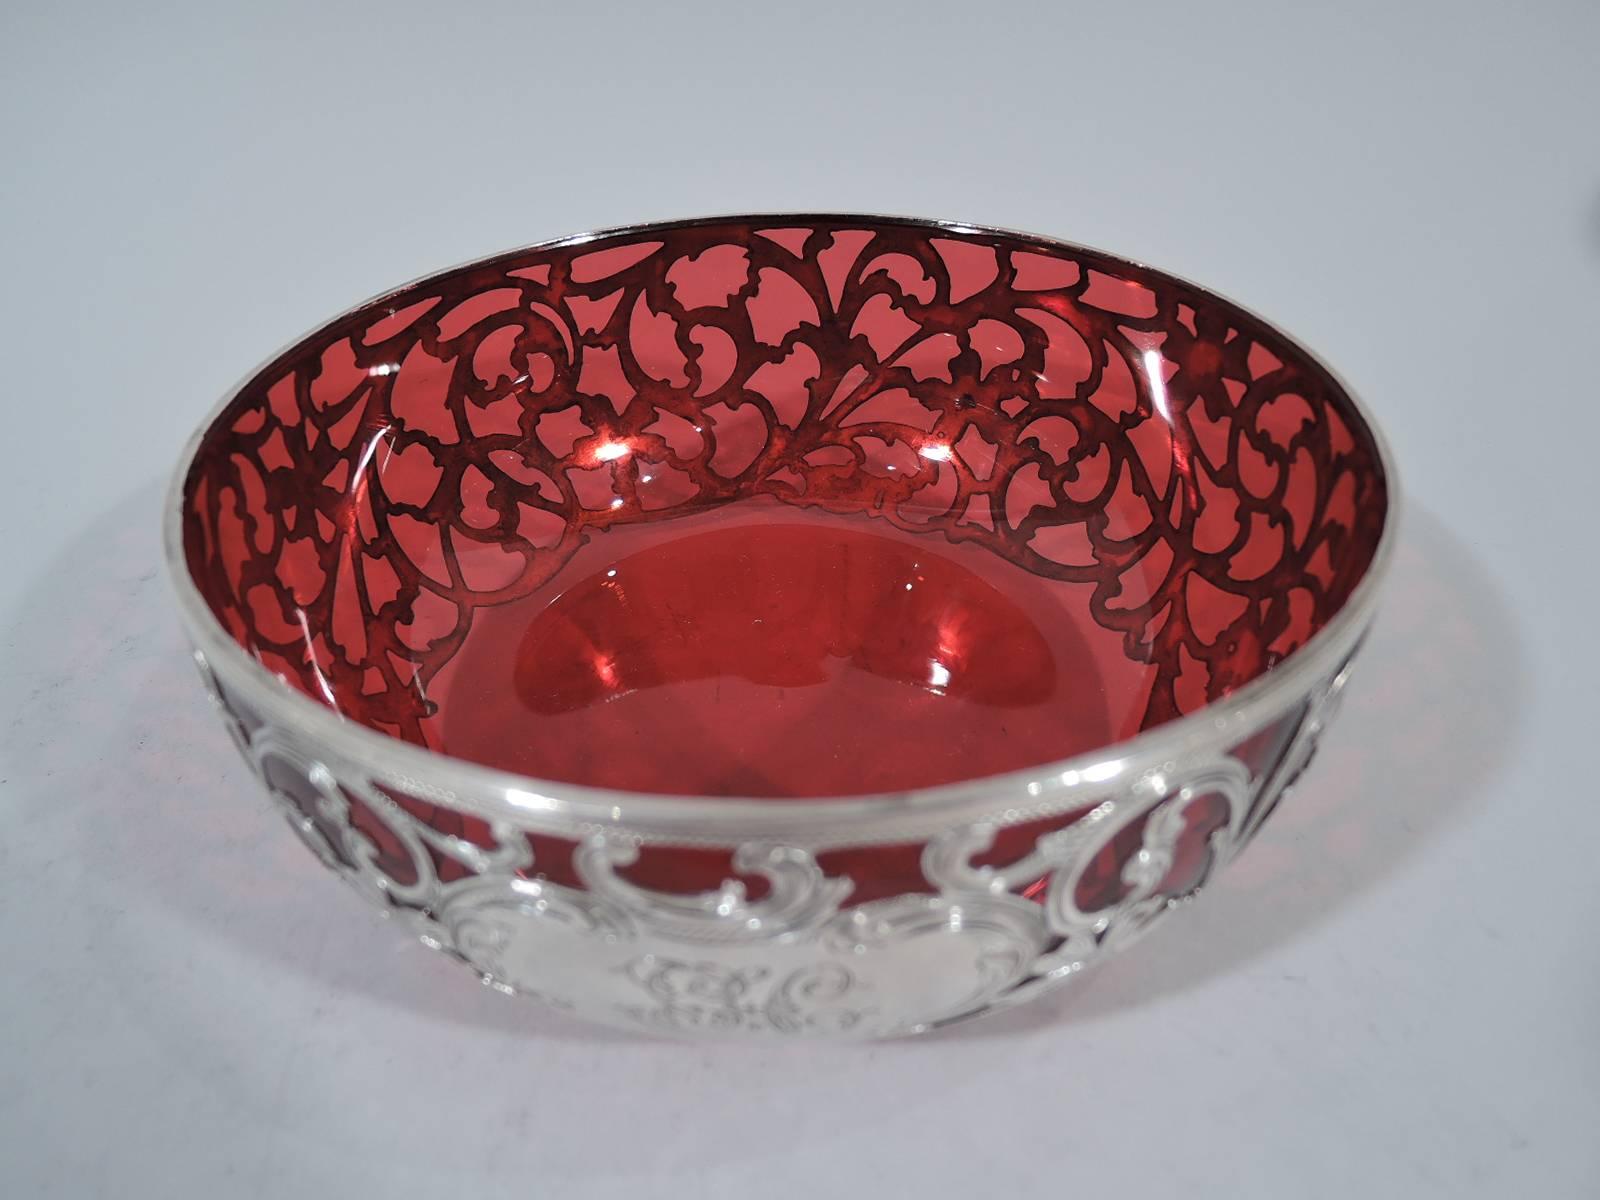 Art Nouveau red glass bowl with silver overlay. Made by Alvin in Providence, circa 1910. Shallow with curved sides. Rinceaux overlay with naturalistic flowers and scrolls. Ground down pontil mark. Hallmark includes no. R399.